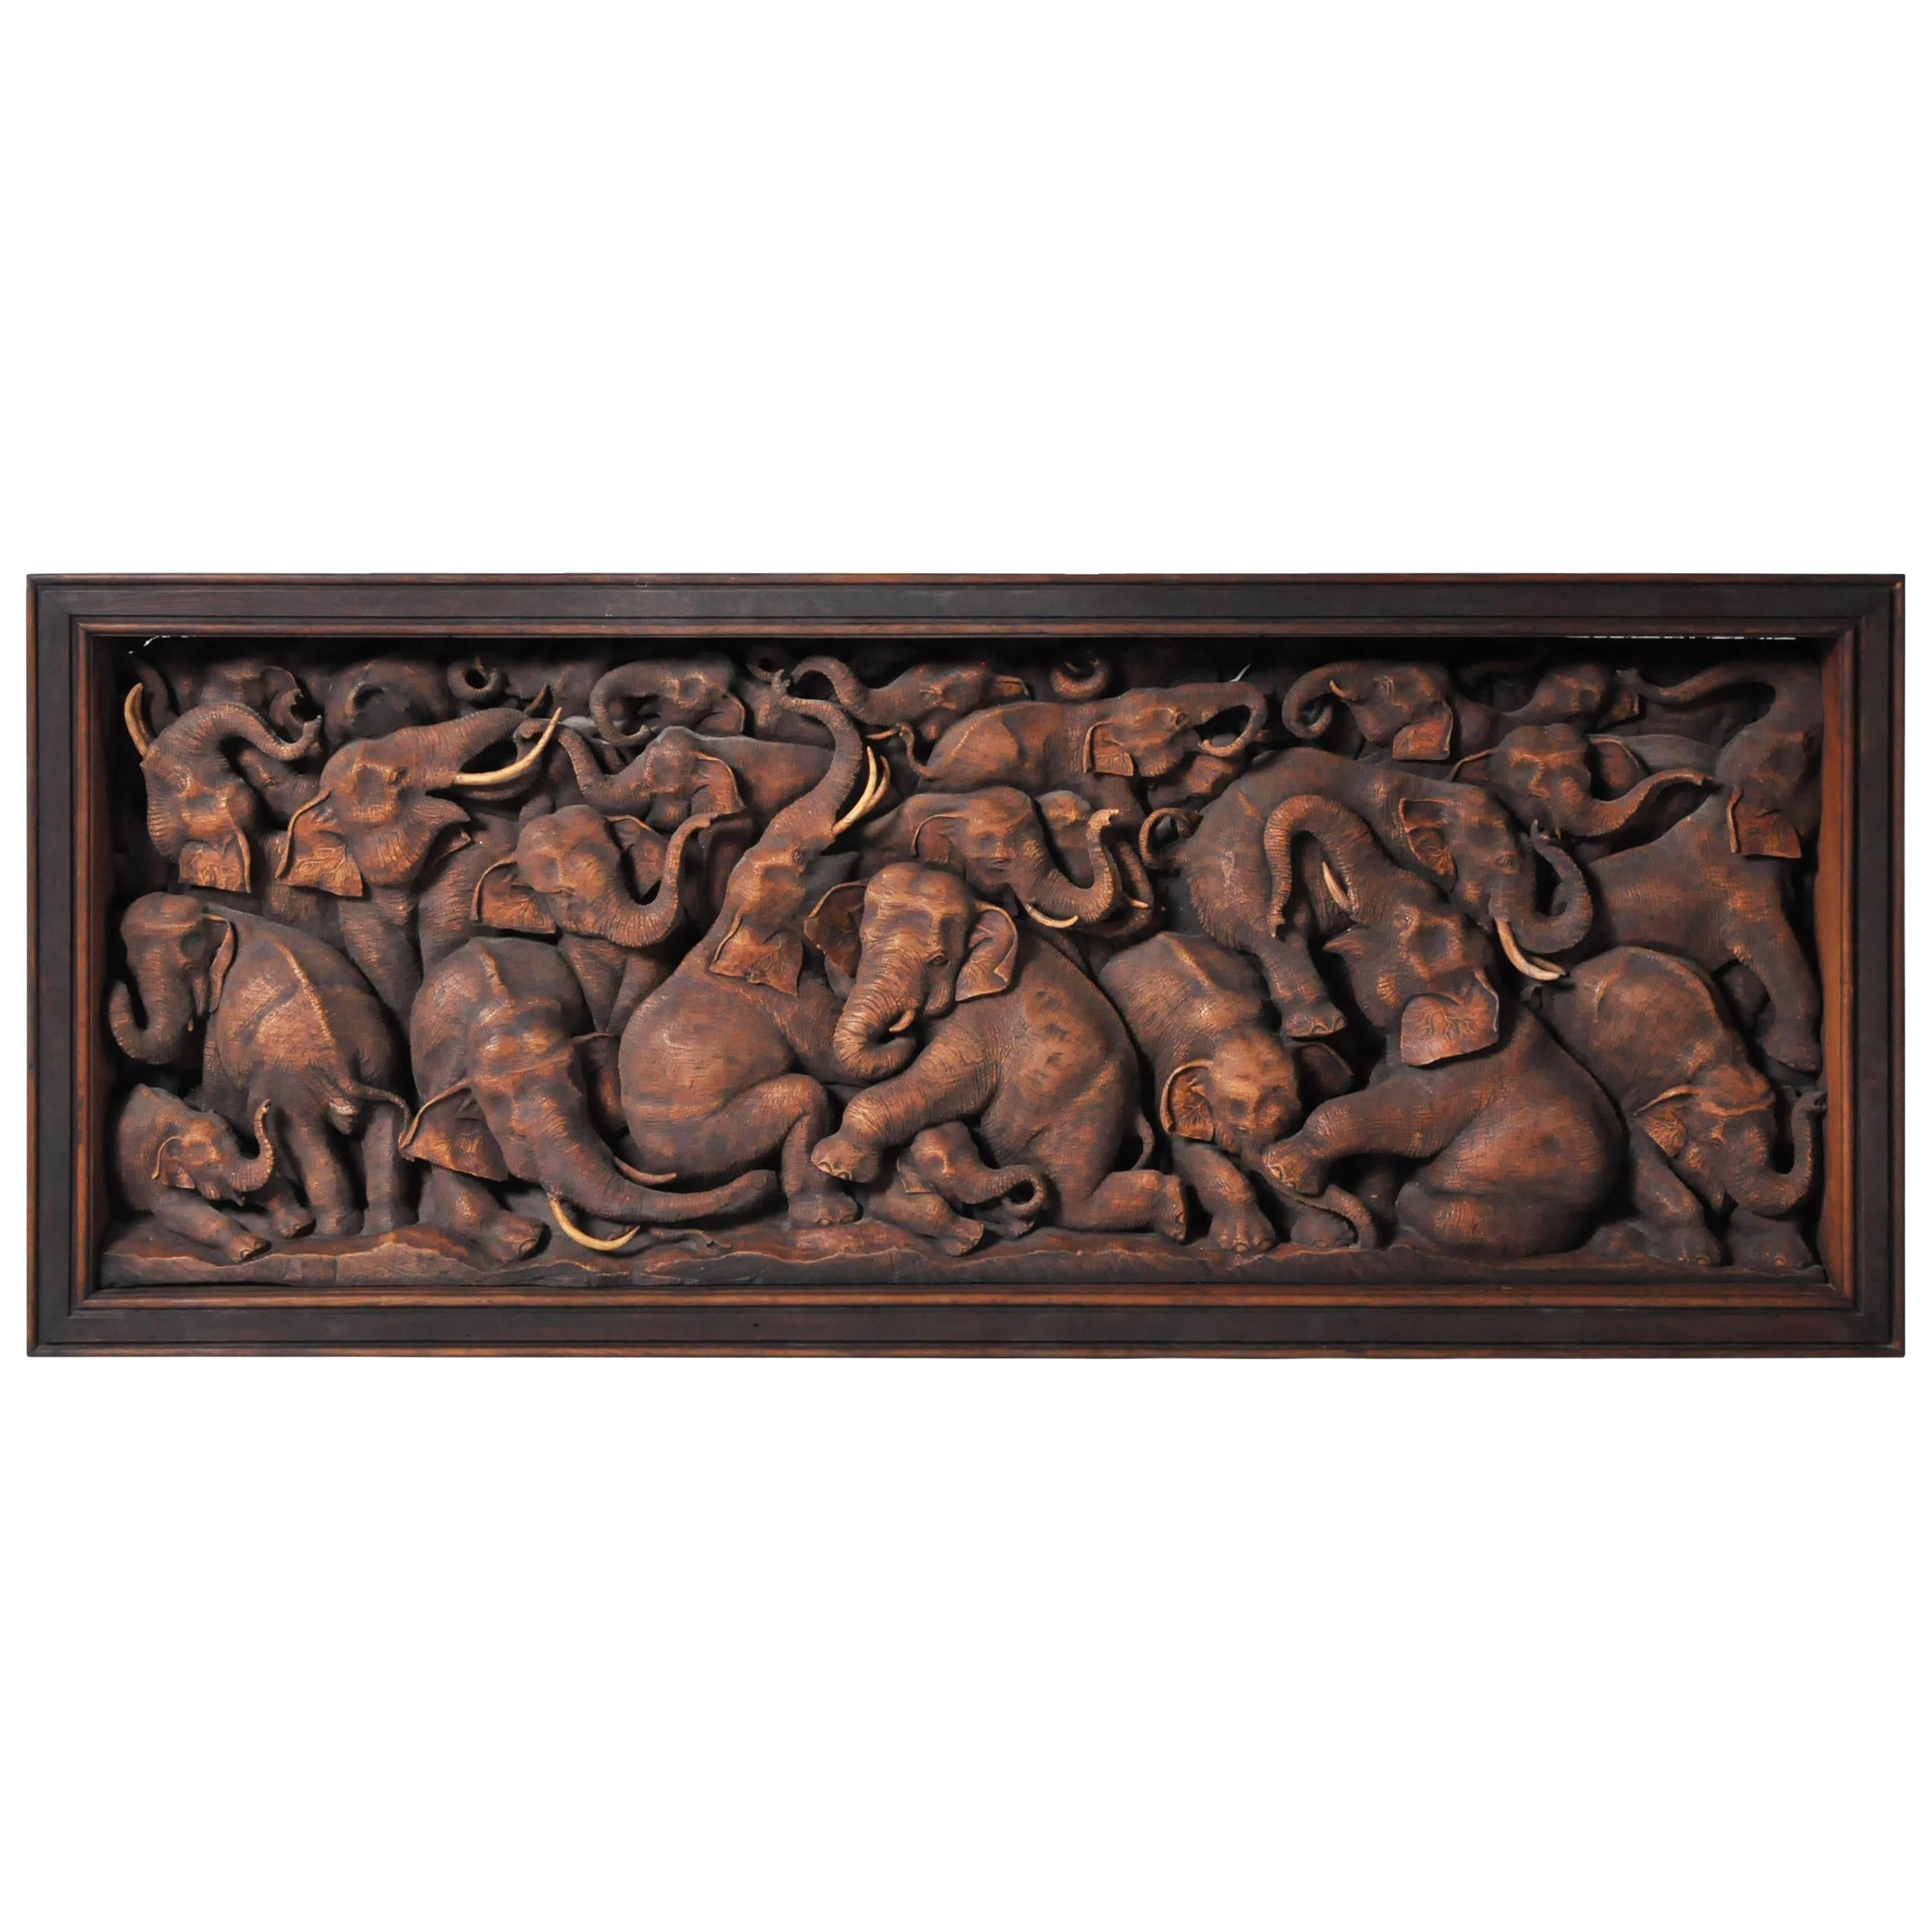 Hand-Carved Herd of Elephants